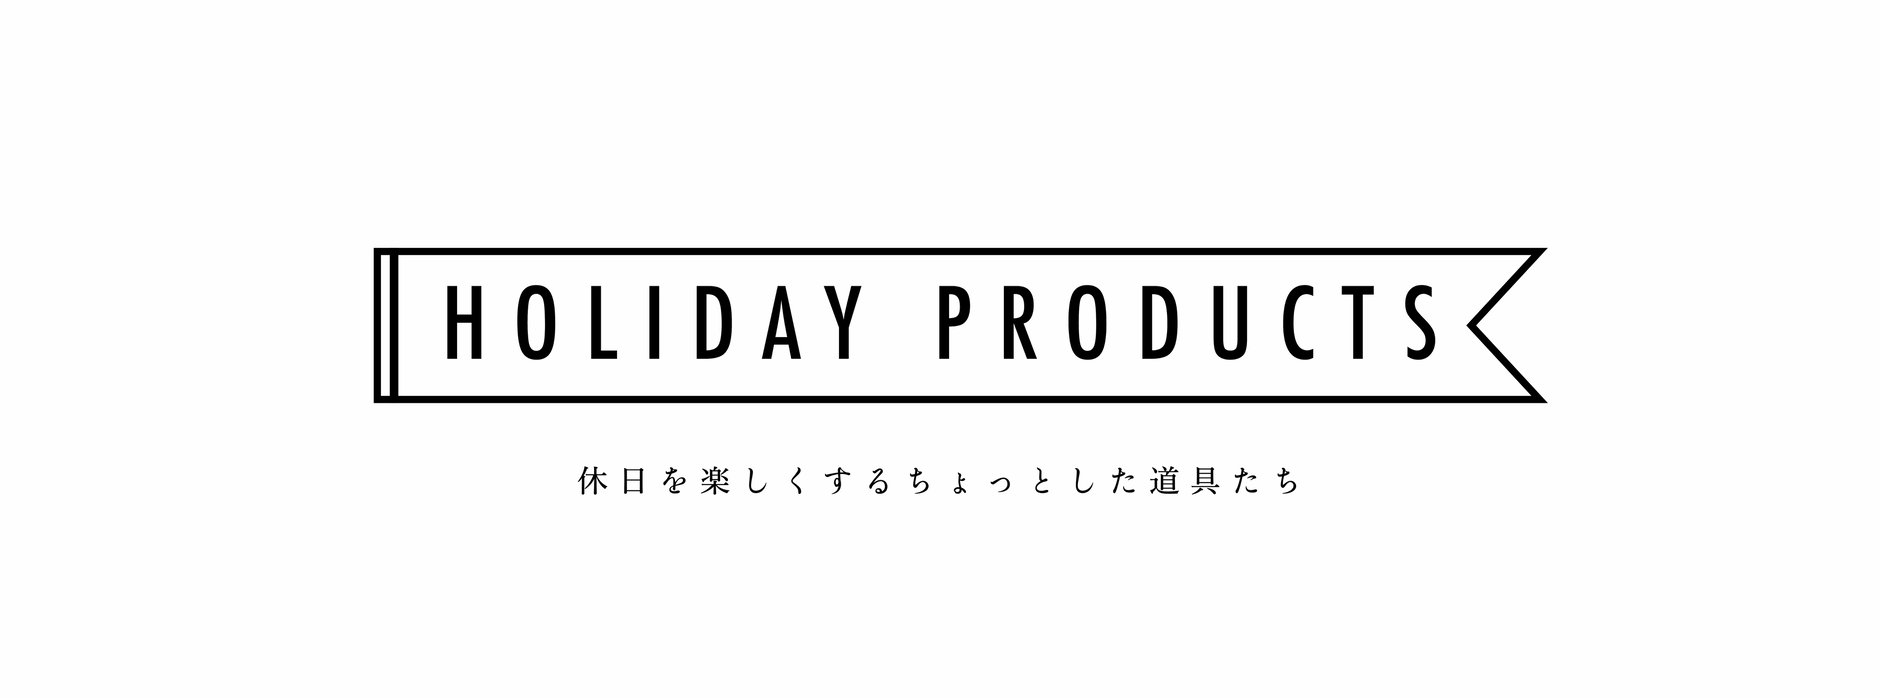 HOLIDAY PRODUCTS